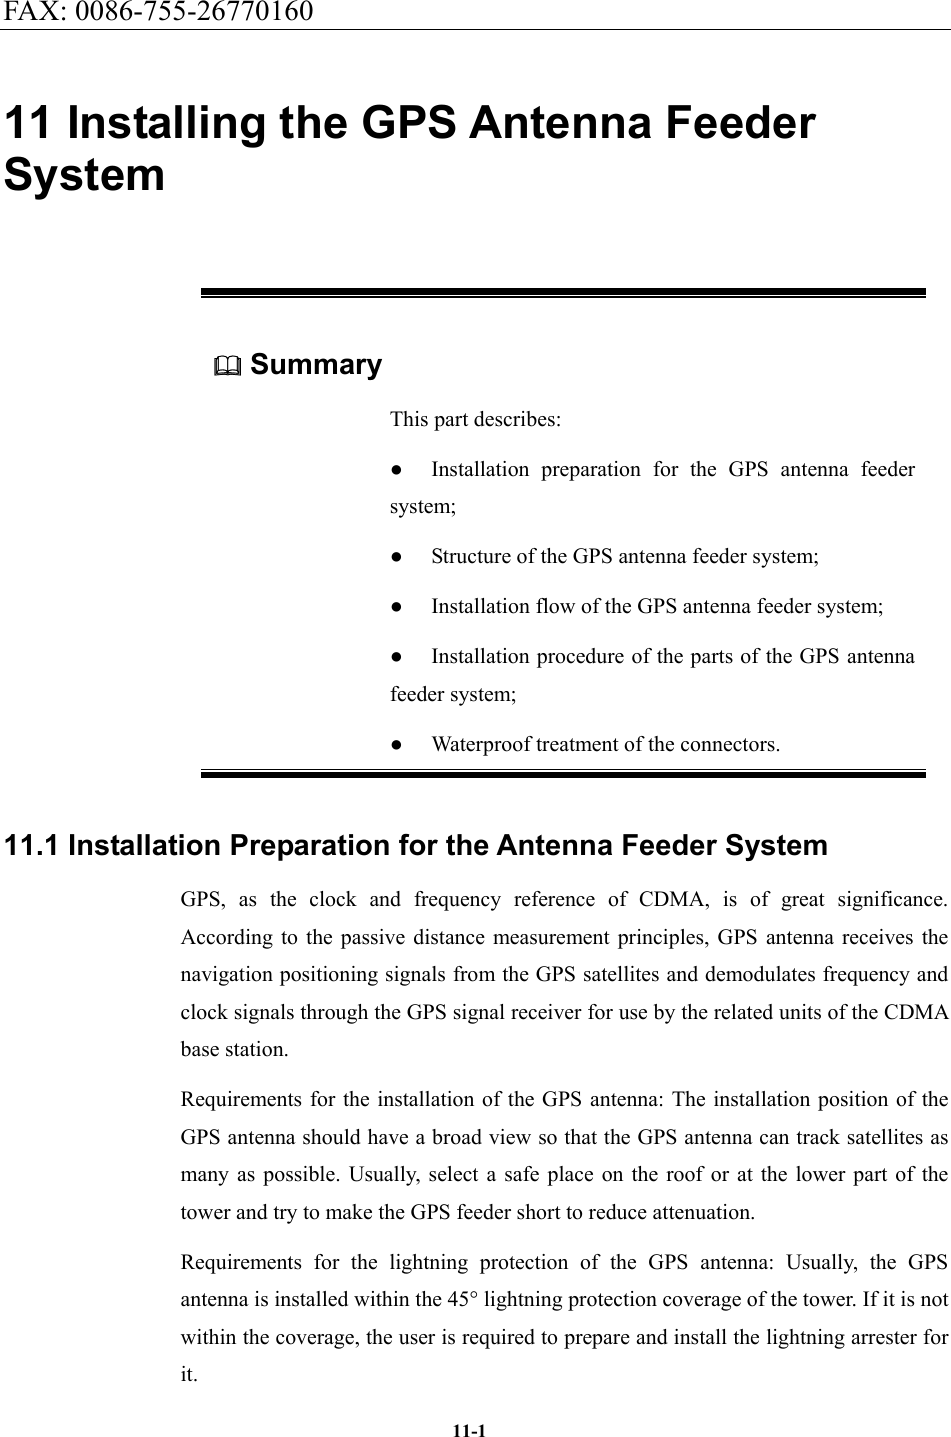 FAX: 0086-755-26770160  11-111 Installing the GPS Antenna Feeder System  Summary This part describes: ●  Installation preparation for the GPS antenna feeder system; ●  Structure of the GPS antenna feeder system; ●  Installation flow of the GPS antenna feeder system; ●  Installation procedure of the parts of the GPS antenna feeder system; ●  Waterproof treatment of the connectors. 11.1 Installation Preparation for the Antenna Feeder System GPS, as the clock and frequency reference of CDMA, is of great significance. According to the passive distance measurement principles, GPS antenna receives the navigation positioning signals from the GPS satellites and demodulates frequency and clock signals through the GPS signal receiver for use by the related units of the CDMA base station. Requirements for the installation of the GPS antenna: The installation position of the GPS antenna should have a broad view so that the GPS antenna can track satellites as many as possible. Usually, select a safe place on the roof or at the lower part of the tower and try to make the GPS feeder short to reduce attenuation.   Requirements for the lightning protection of the GPS antenna: Usually, the GPS antenna is installed within the 45° lightning protection coverage of the tower. If it is not within the coverage, the user is required to prepare and install the lightning arrester for it. 